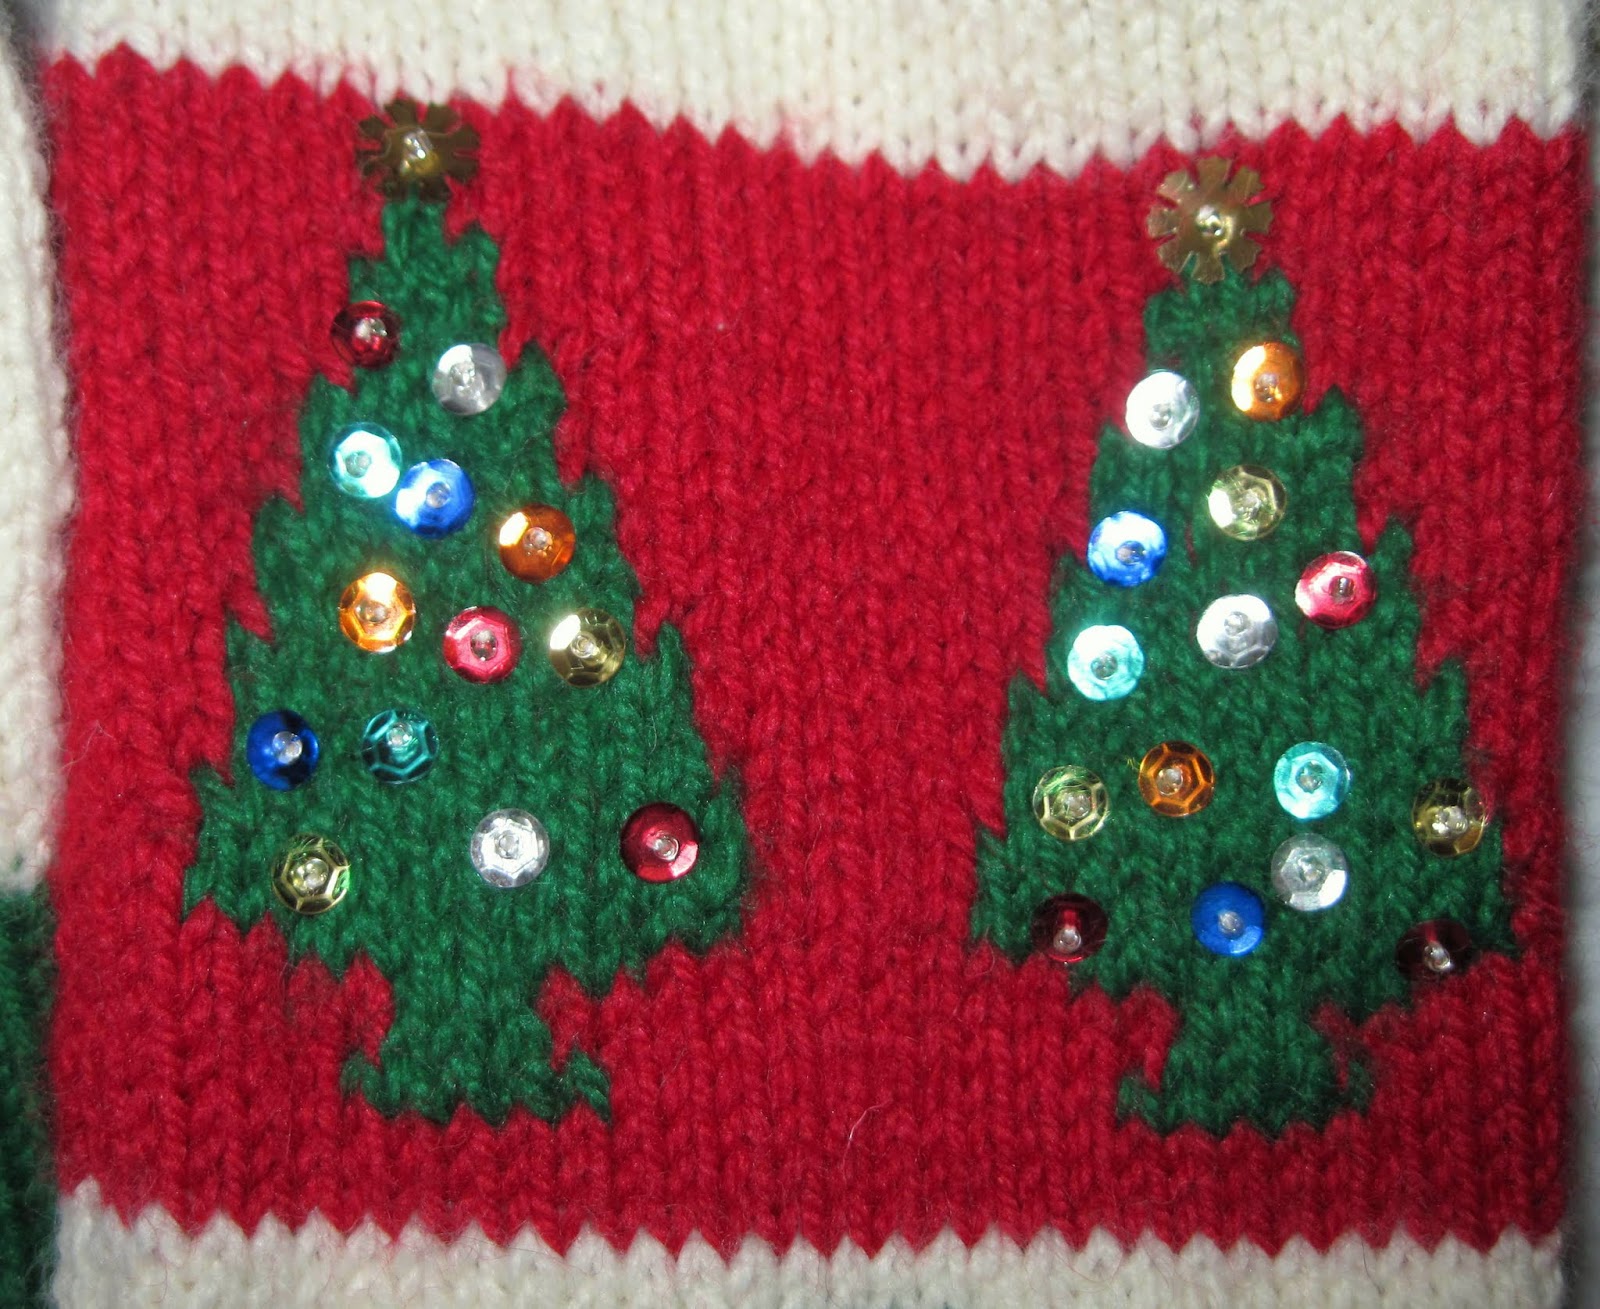 The Cultured Purl: About Christmas Stockings